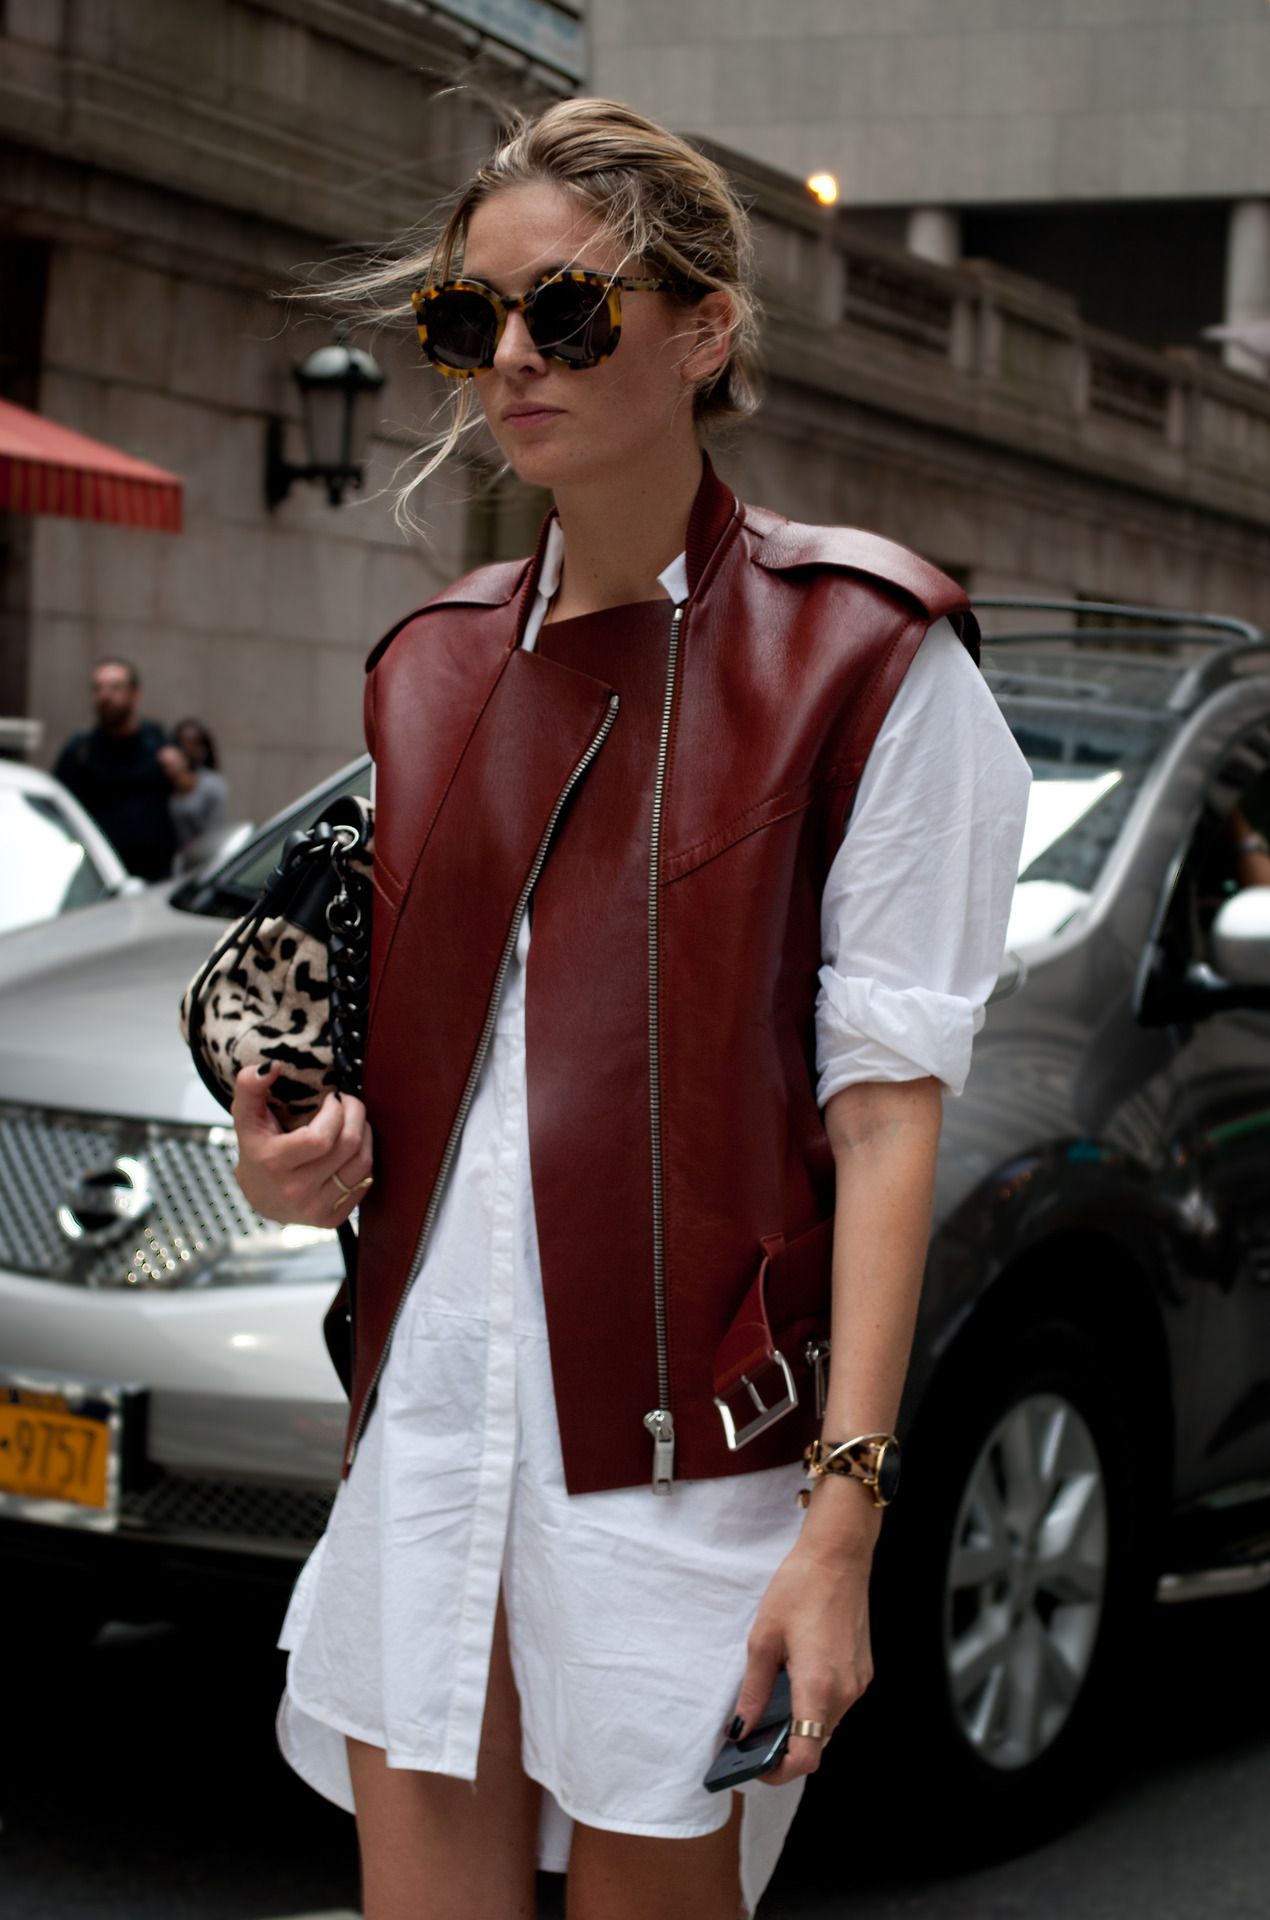 13 Amazing Biker Vest Outfit Ideas for Women: Style Guide